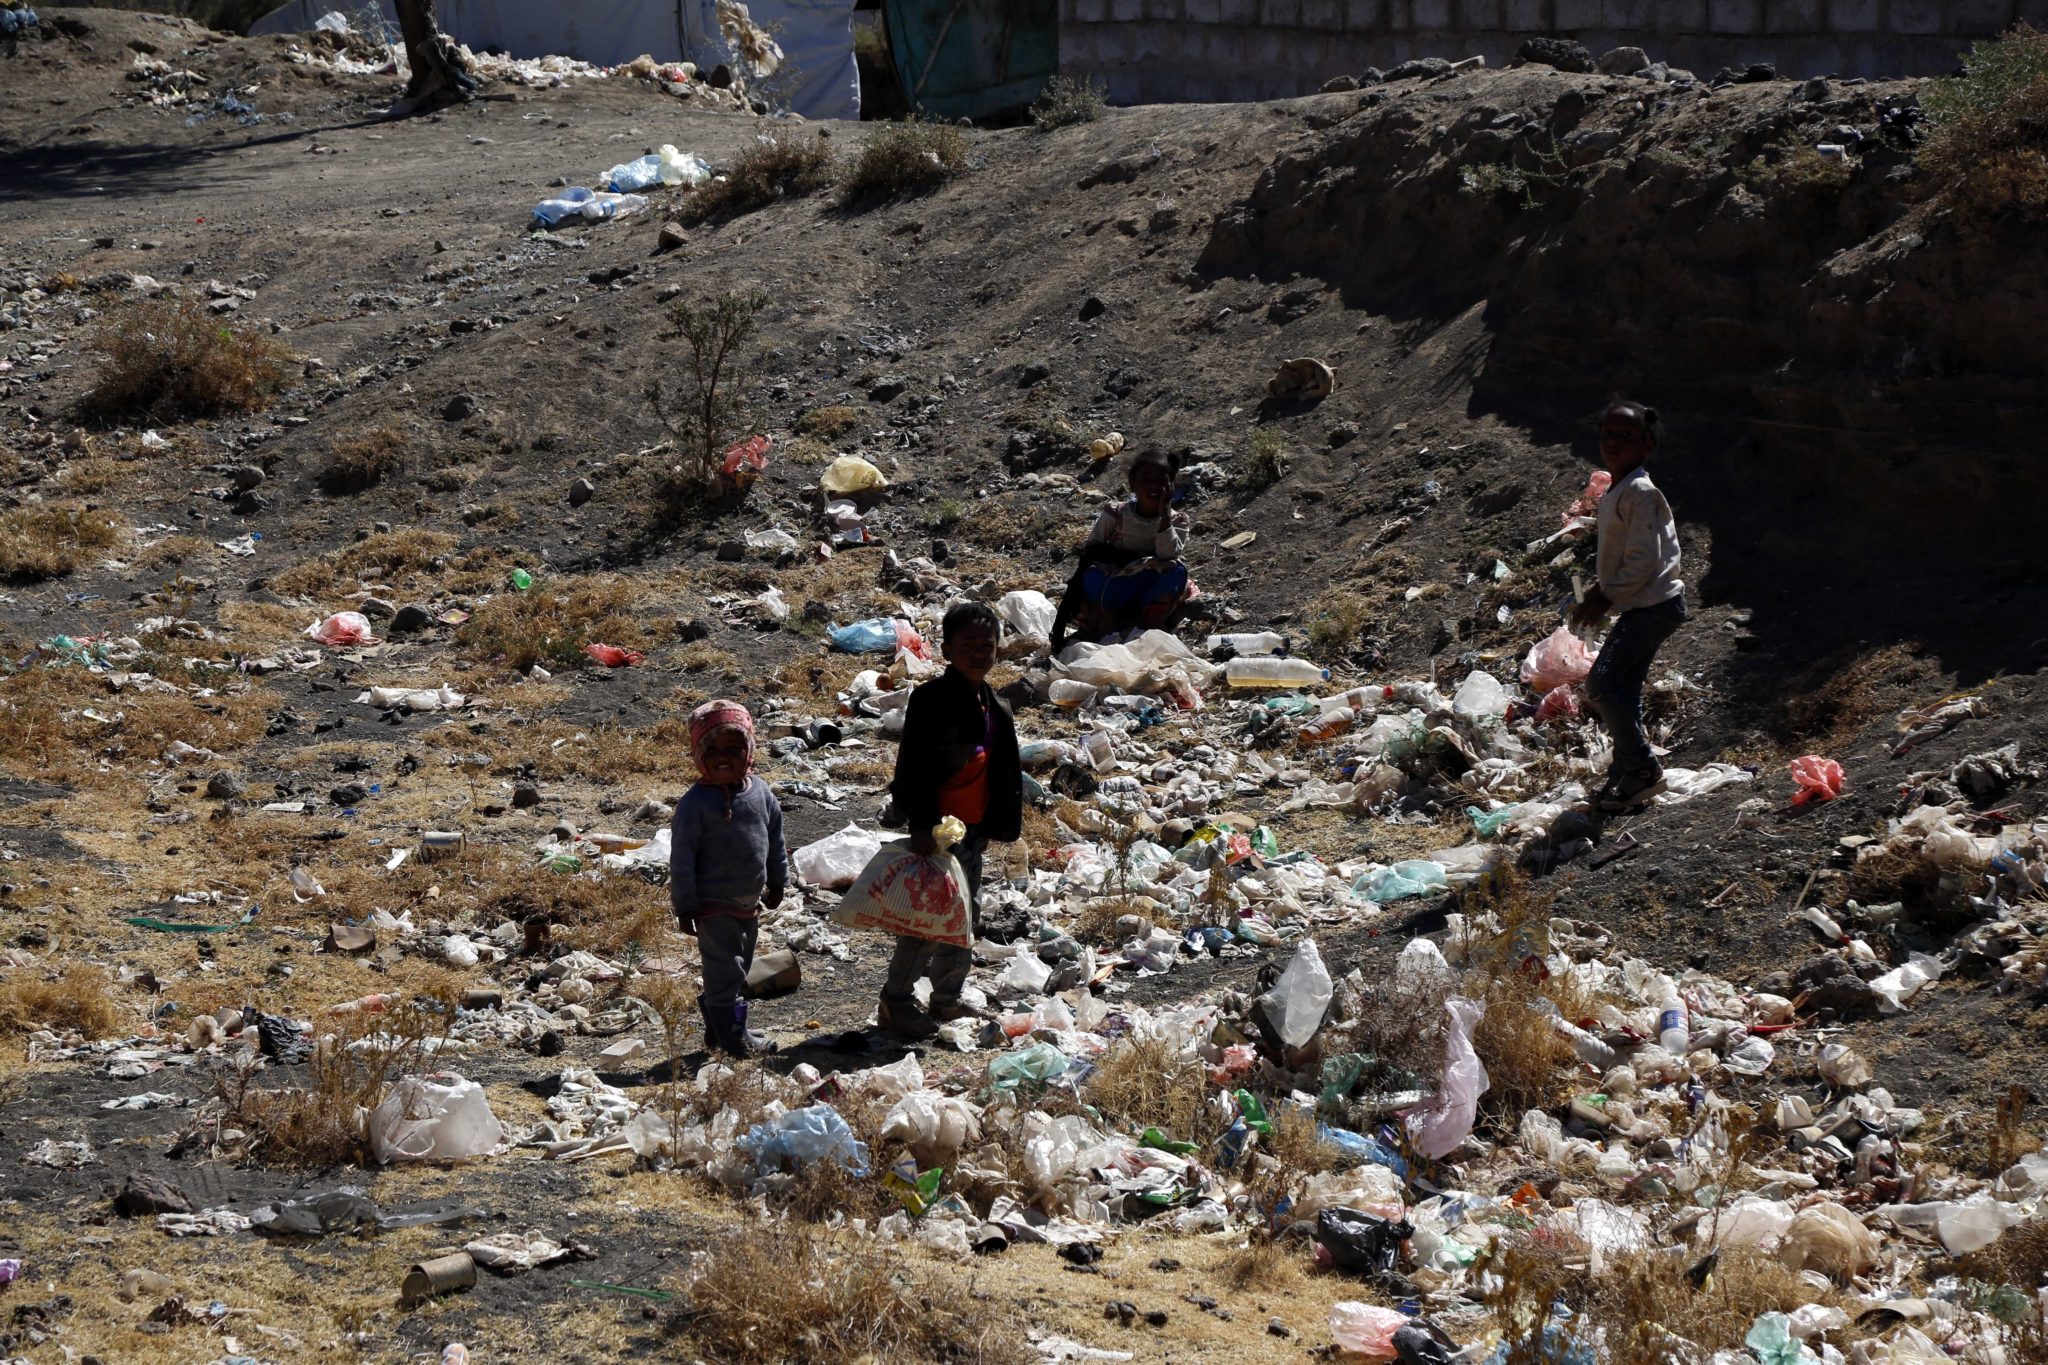 Children are seen among garbage at a displacement camp in Yemen 